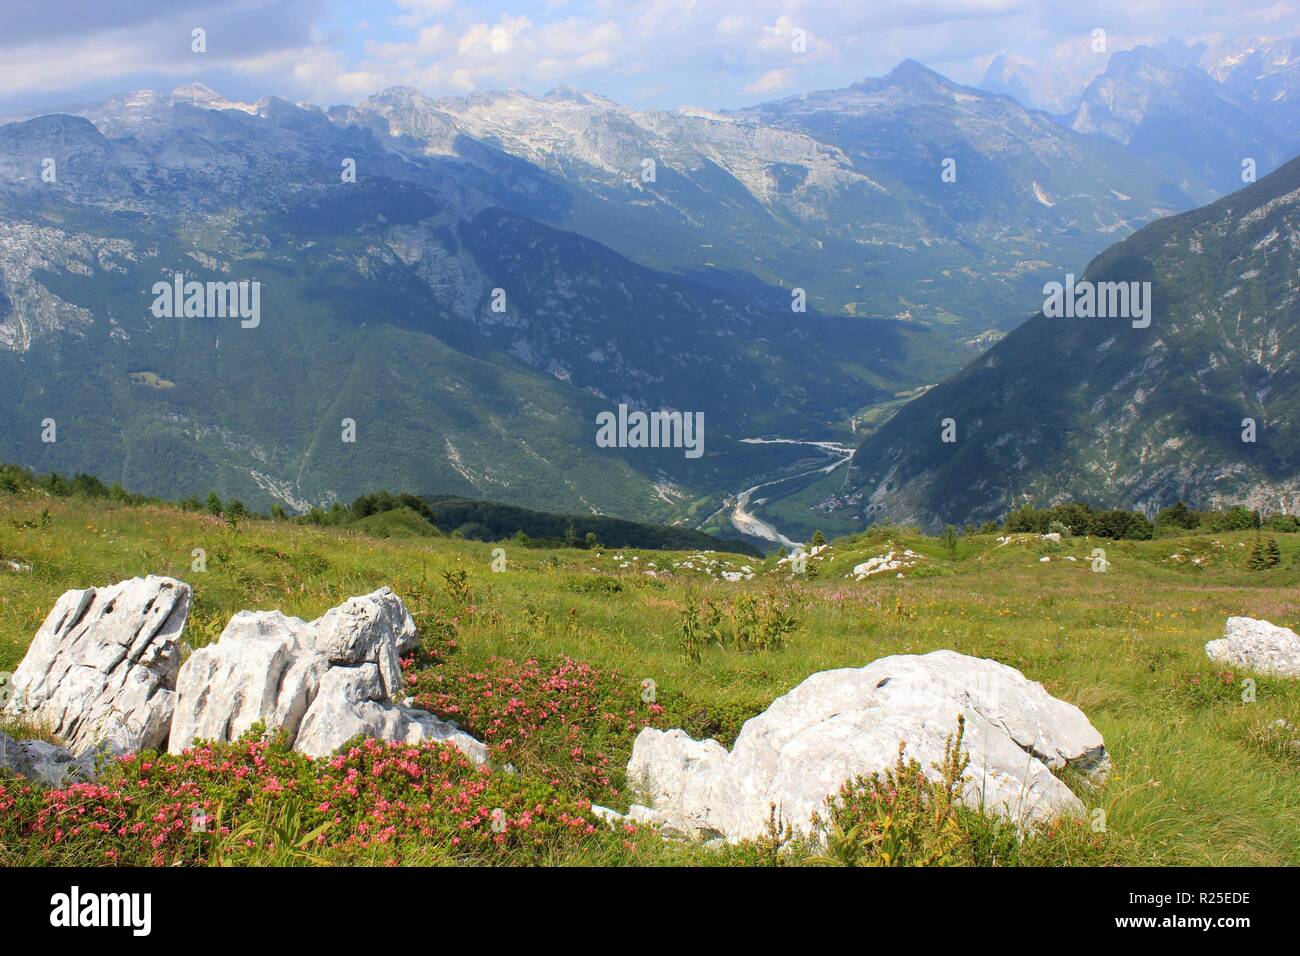 Alpine landscape with great Laurel flowers (rhododendron), Soca valley and Juliana Walking Trail in the background, Mount Kobariski Stol, Slovenia, EU Stock Photo